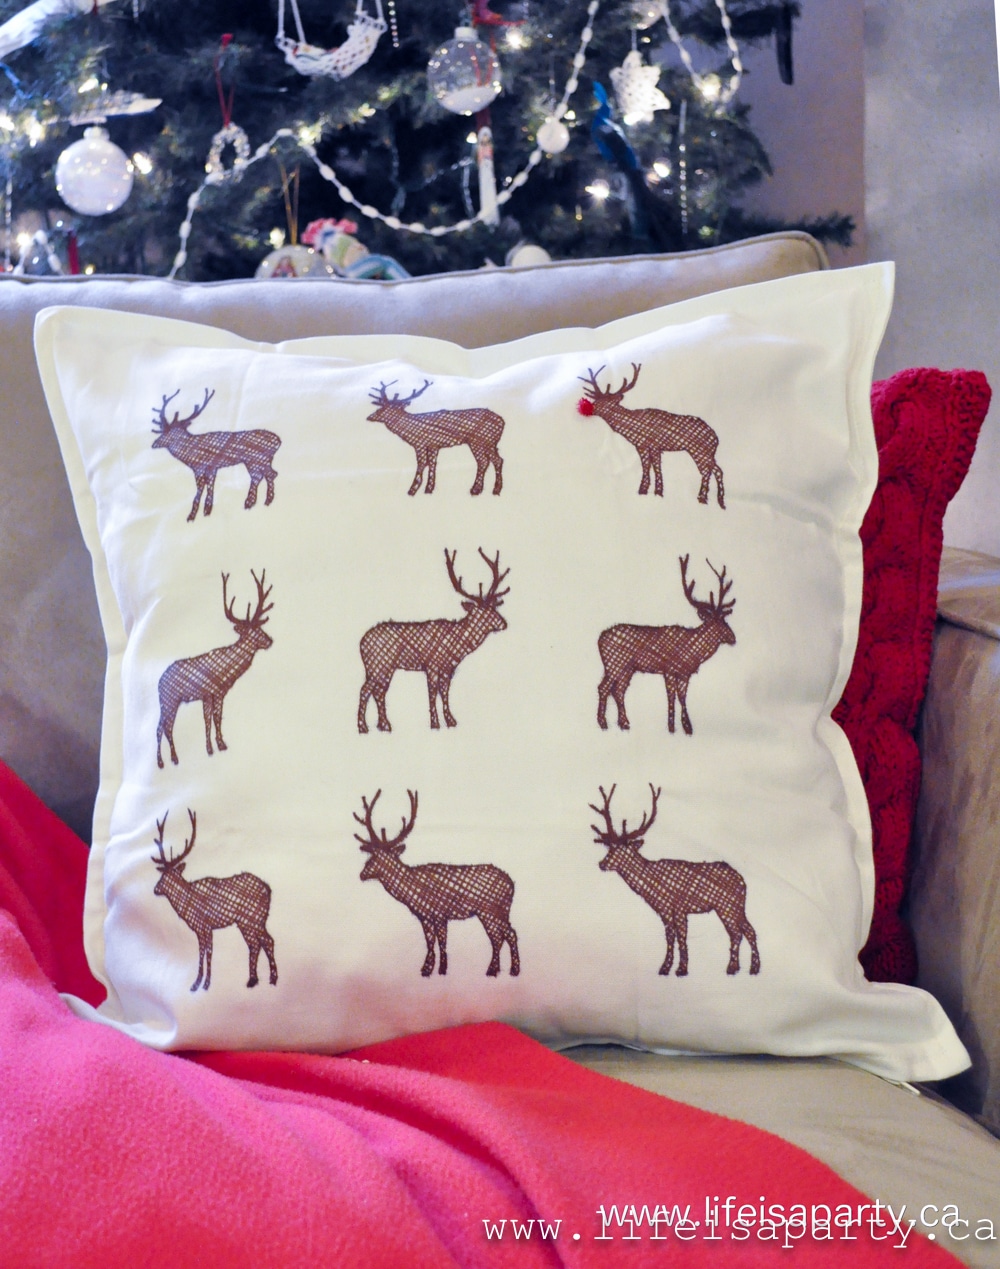 DIY Sharpie Reindeer Pillow: No-sew project, using an inexpensive pillow and a sharpie marker to make your own custom Christmas pillow.